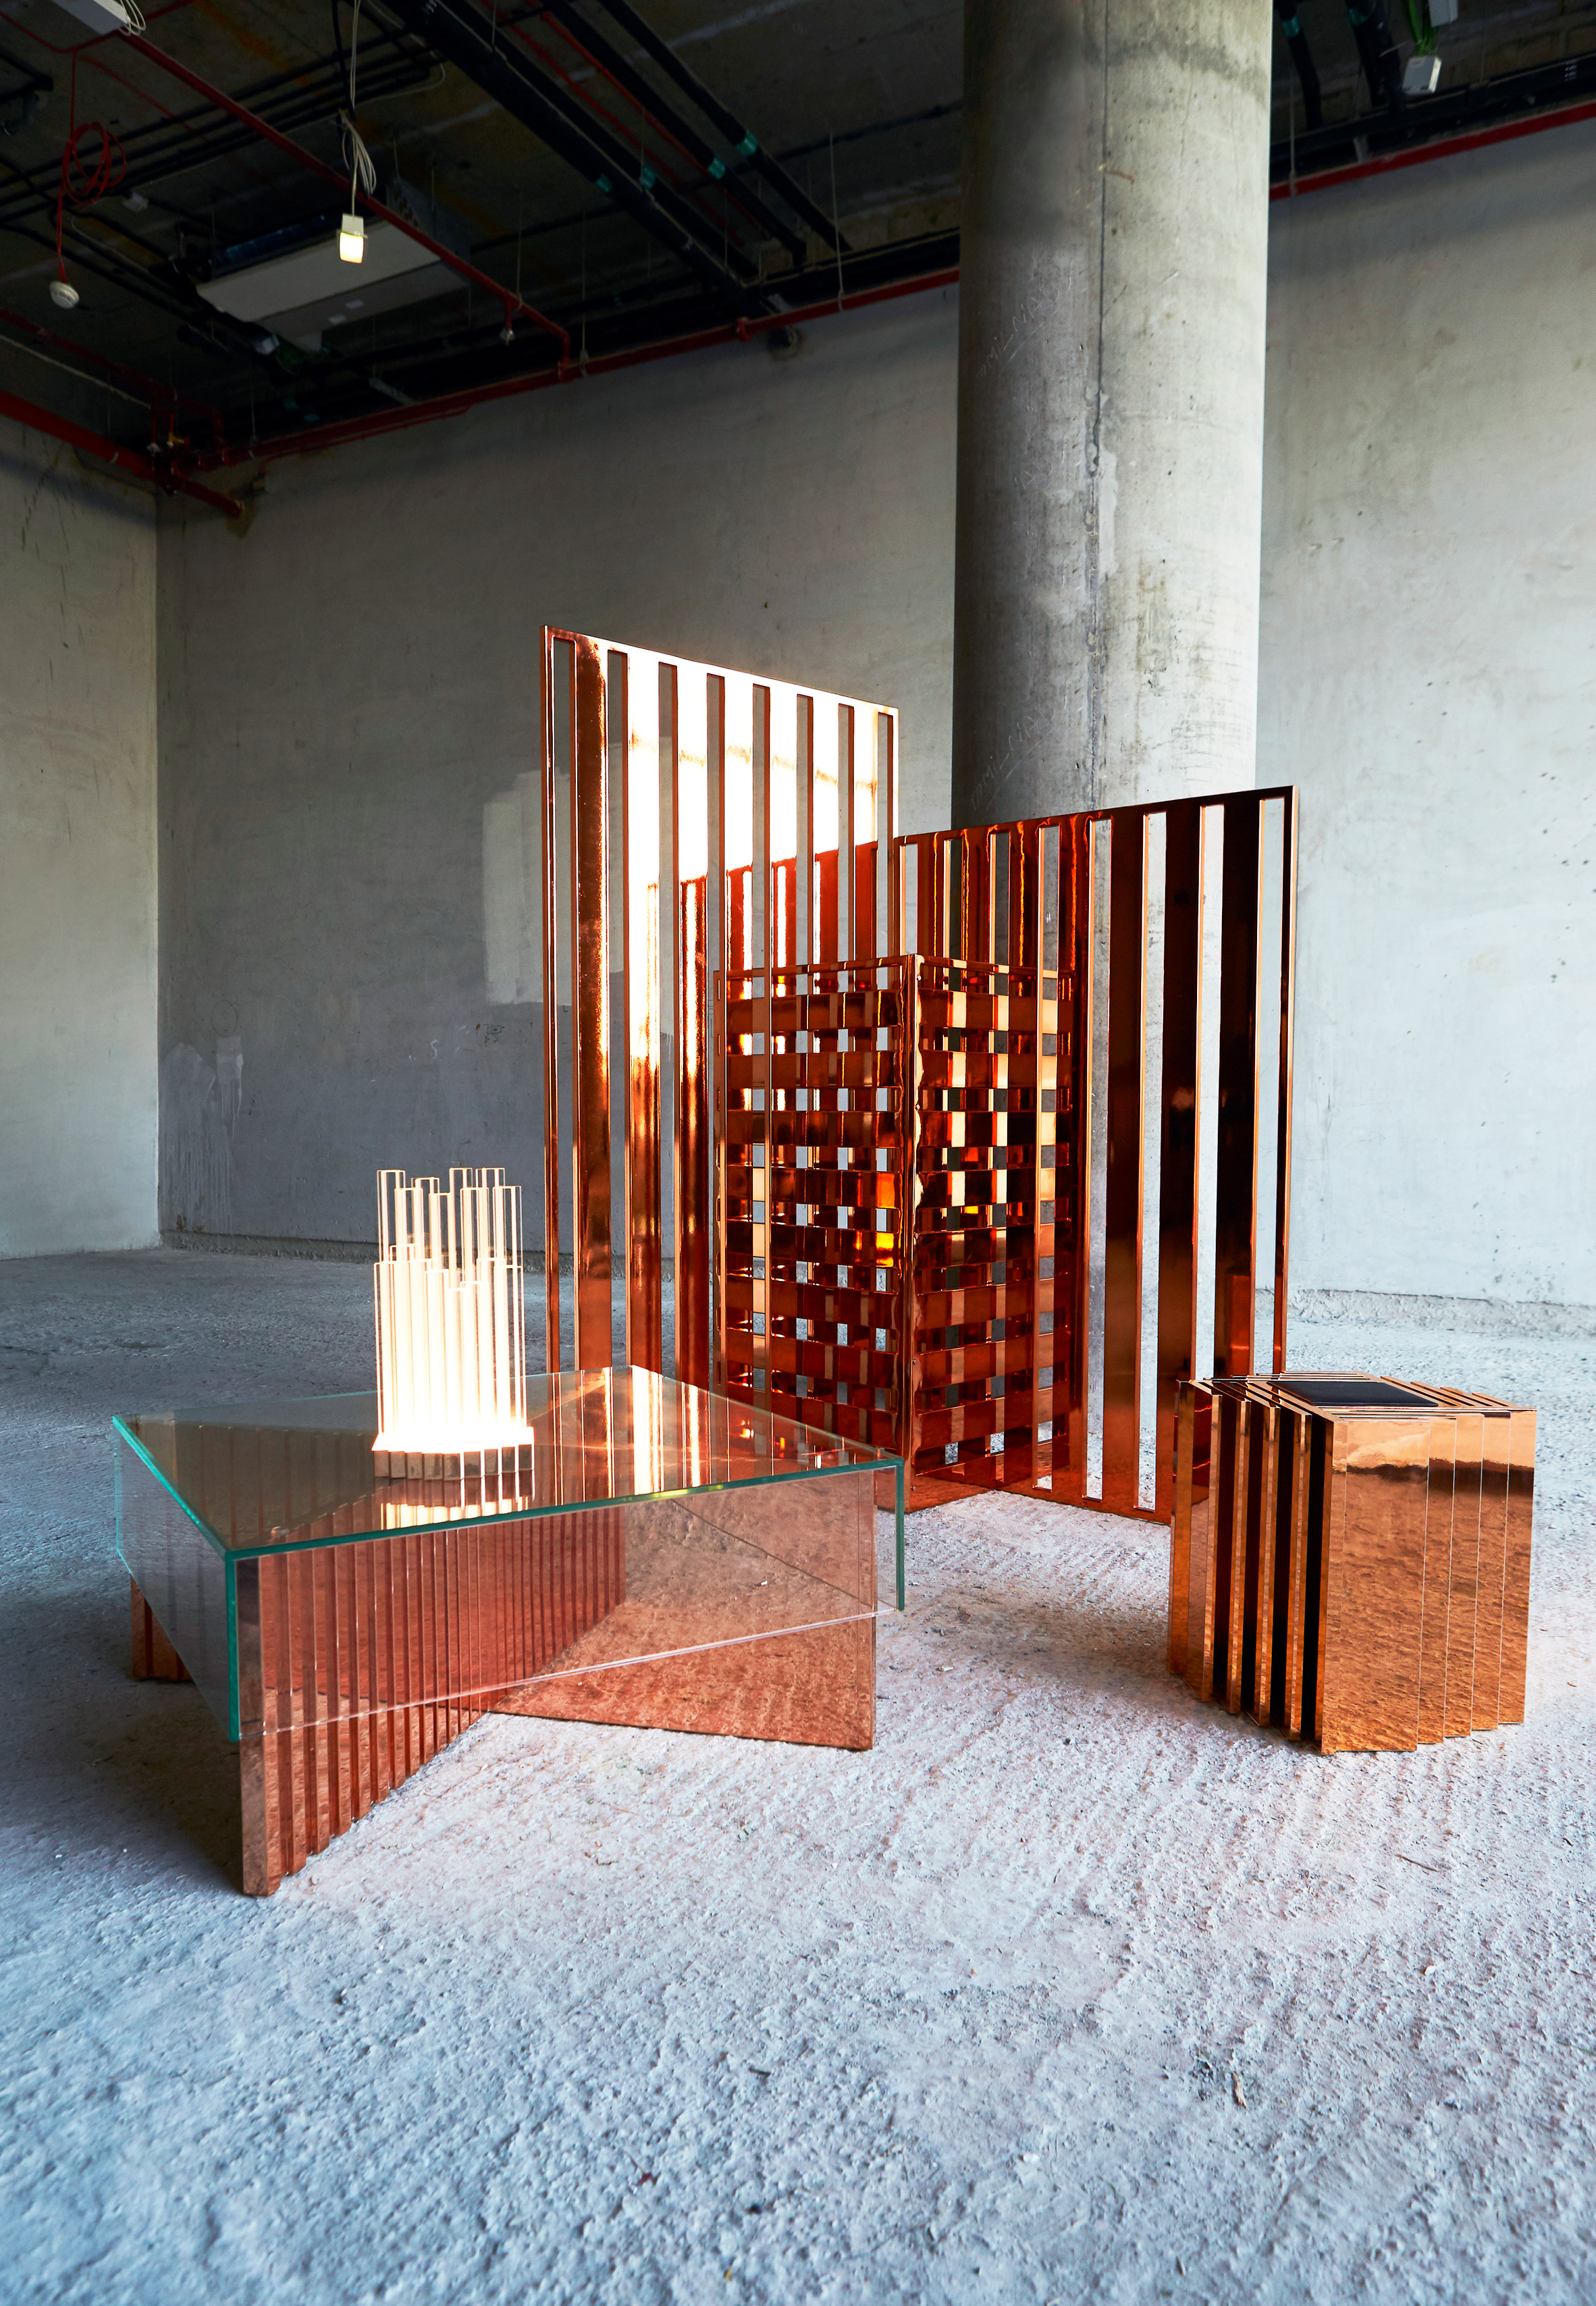 Aljoub Lootah's furniture collection takes cues from traditional areesh structures